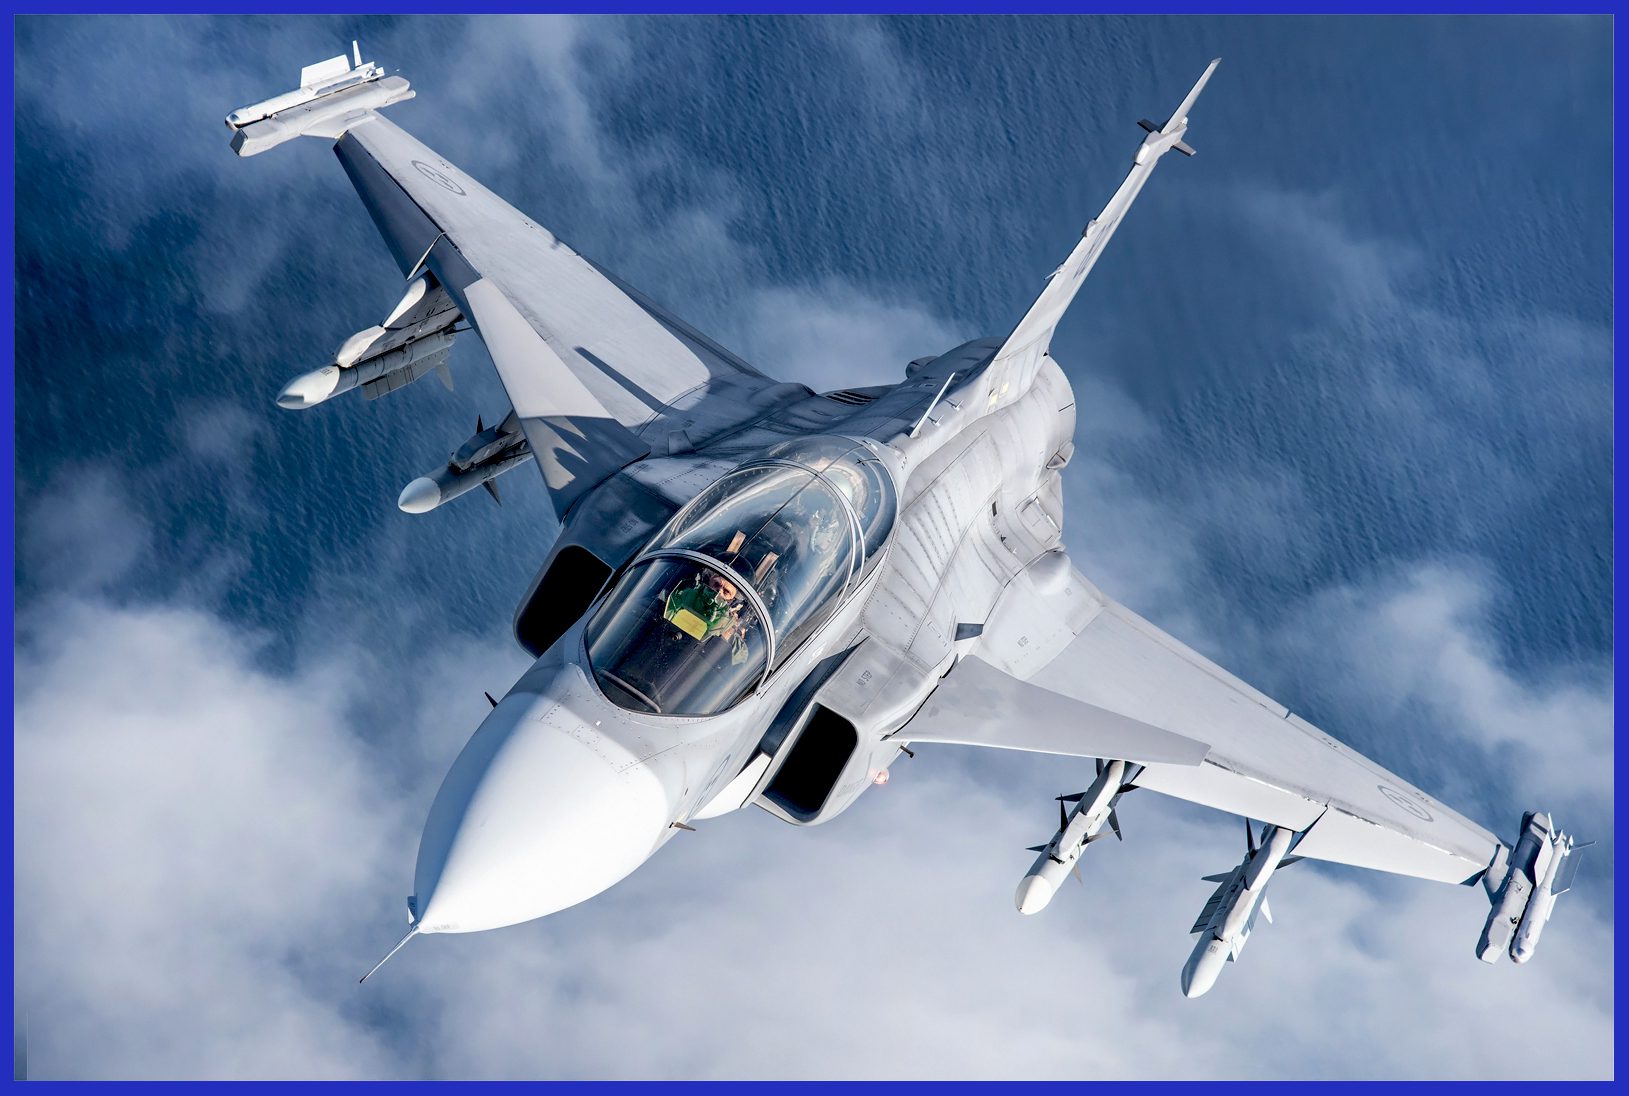 A highly lethal and advanced configuration of air-to-air missiles, comprising IRIS-T on the wingtips, along with two Meteor and two AMRAAM Beyond Visual Range (BVR) missiles. In a real combat scenario, Gripen pilots will undoubtedly make sure that some splashes are counted!